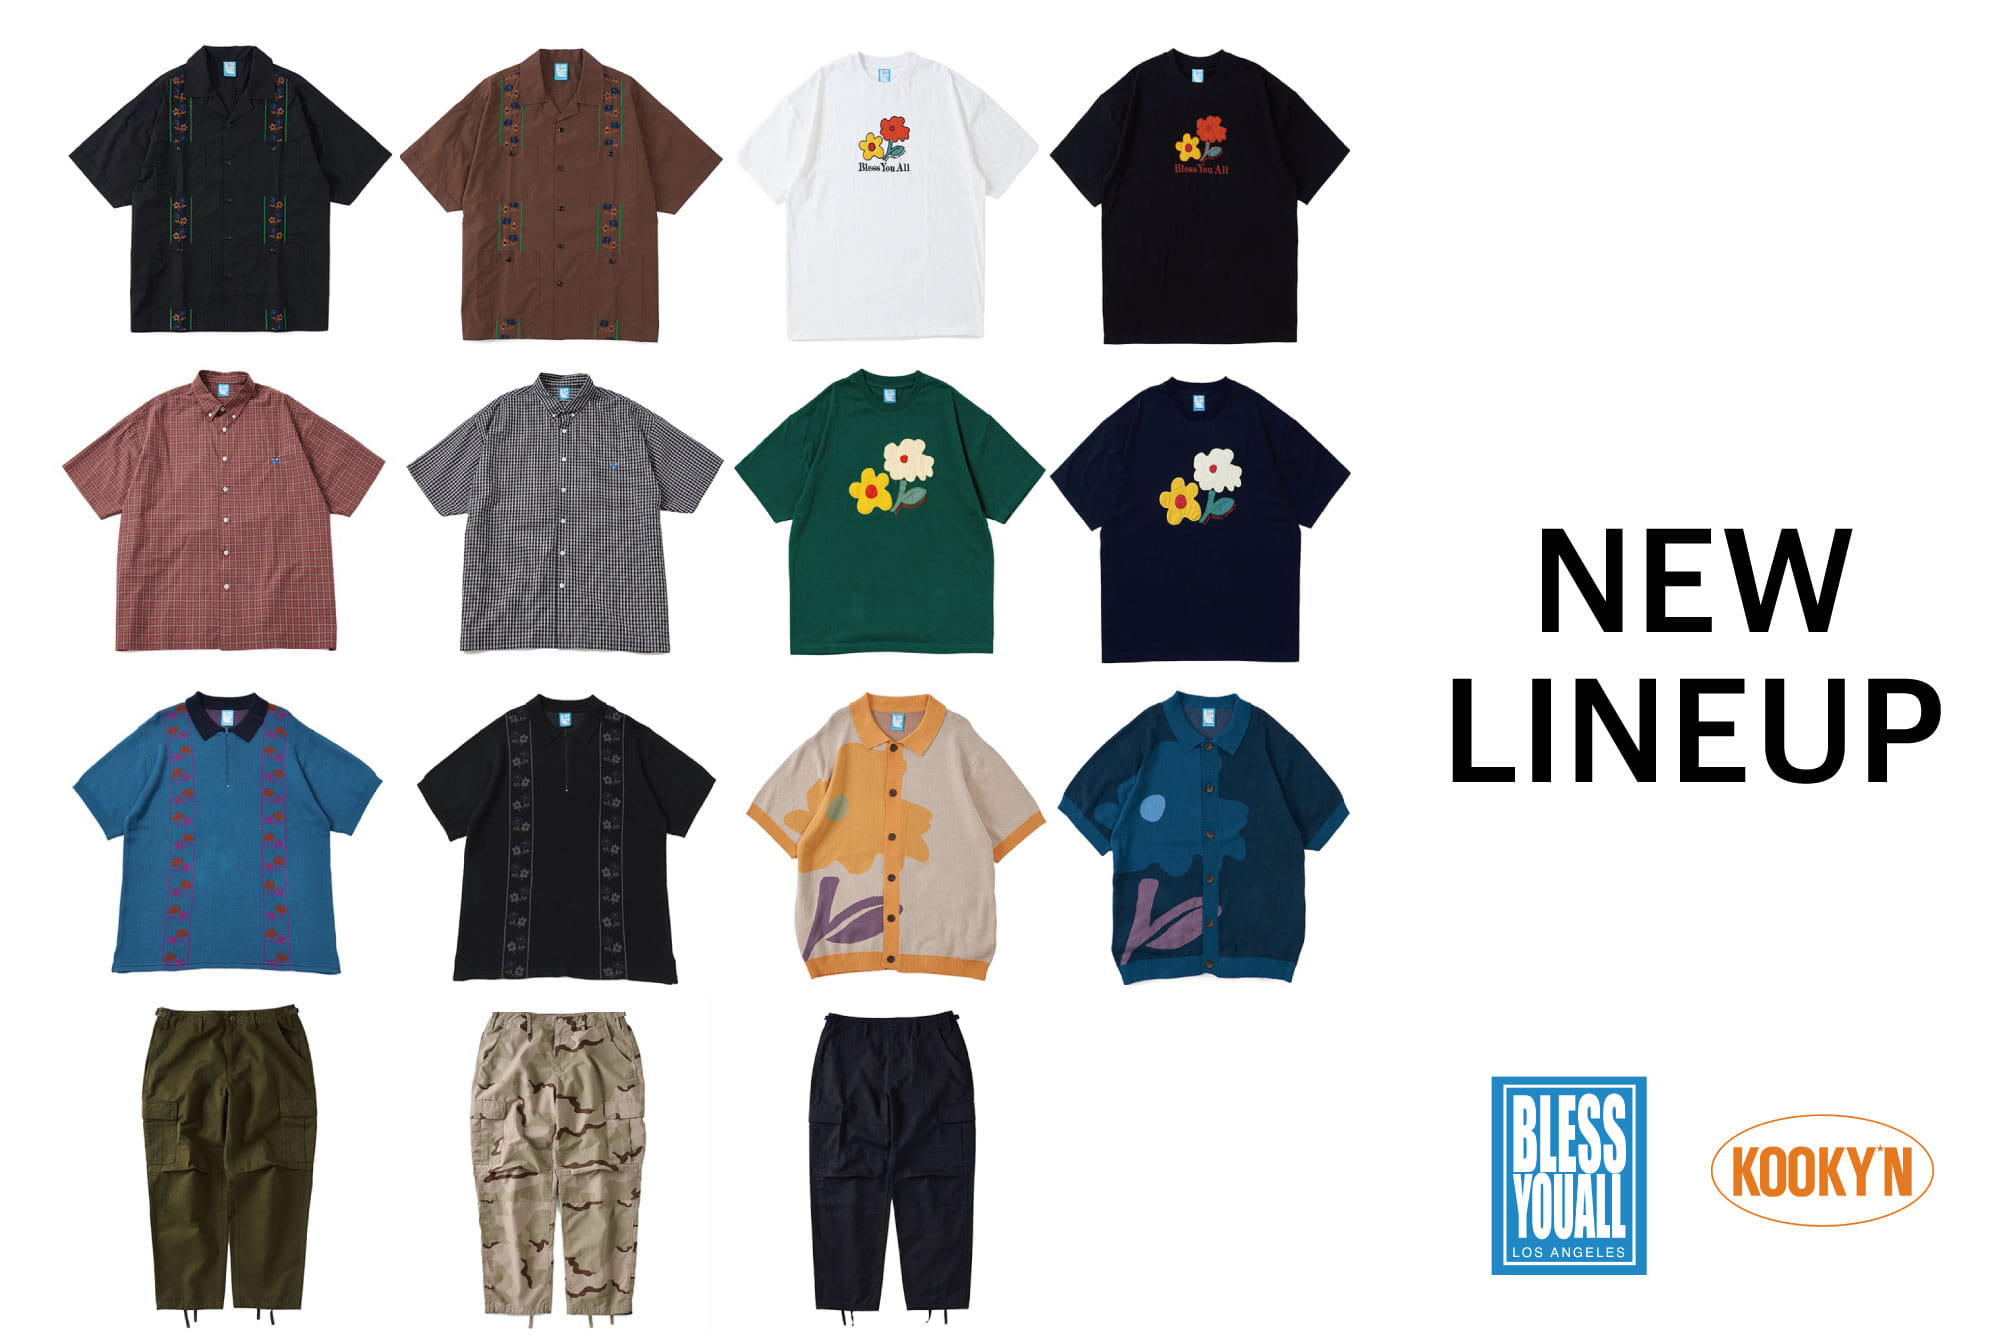 WHO’S WHO gallery 【BLESS YOU/KOOKY'N NEW ITEMS】